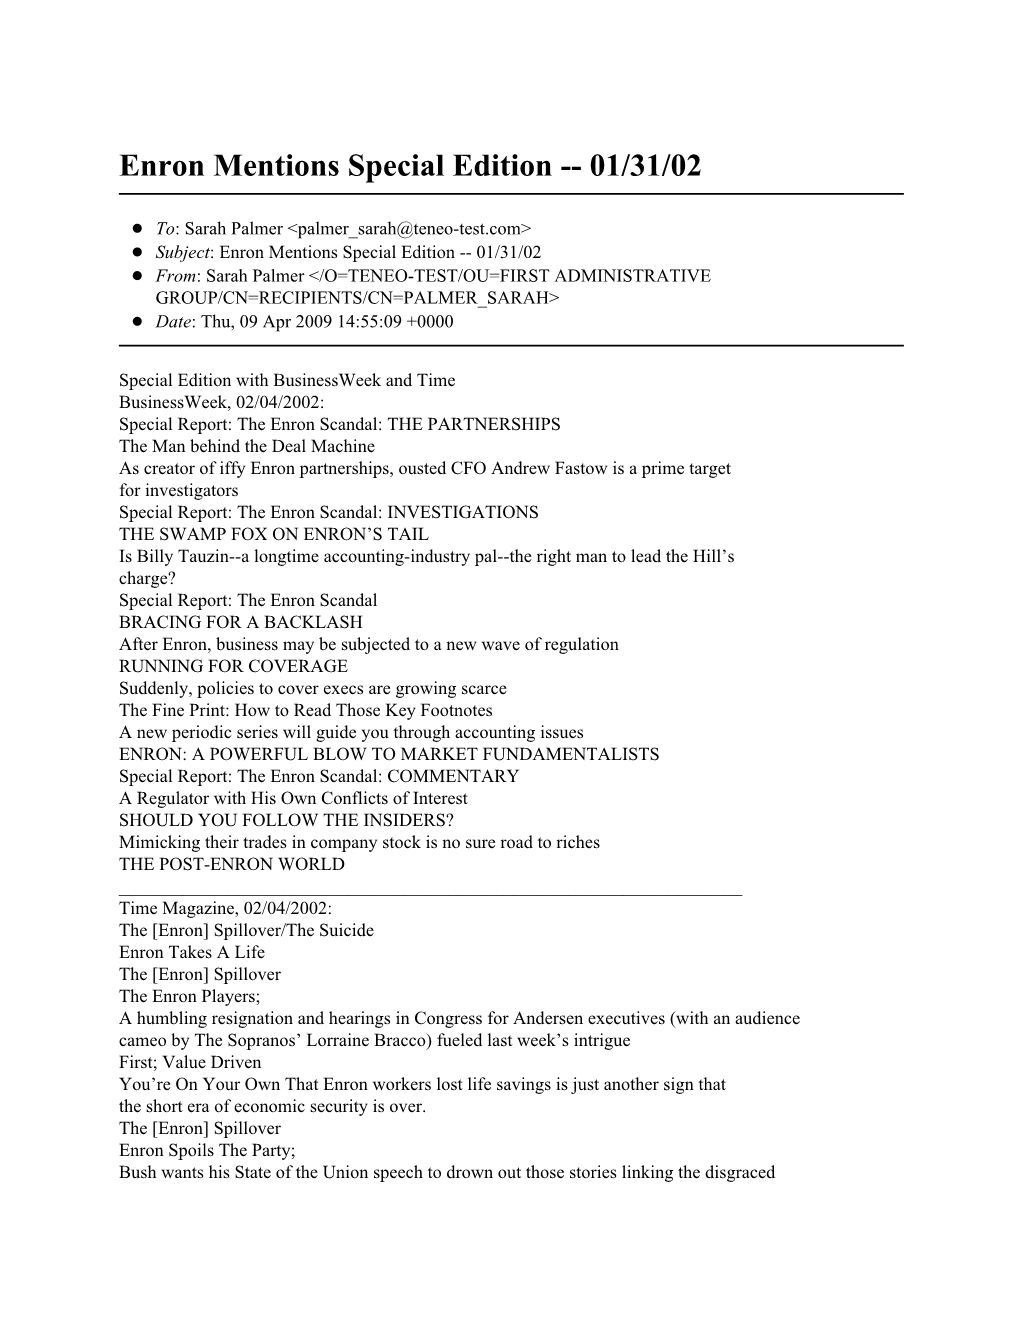 Enron Mentions Special Edition -- 01/31/02